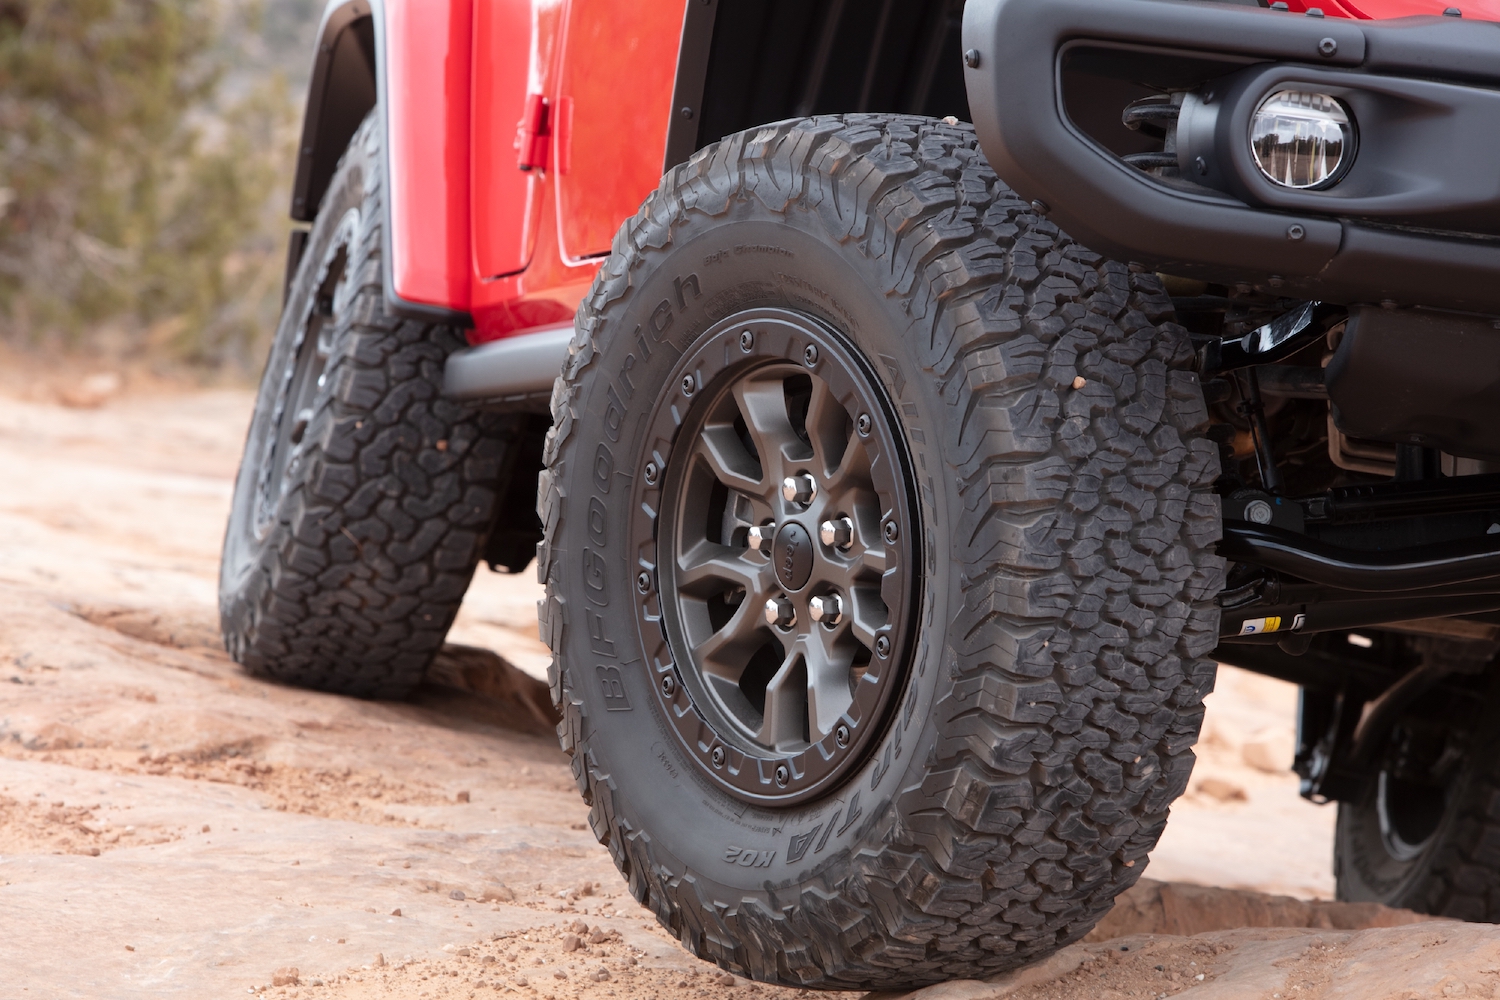 Closeup of the oversized tires on a Jeep Wrangler Rubicon 392 American SUV, while they navigate an off-road 4x4 trail.